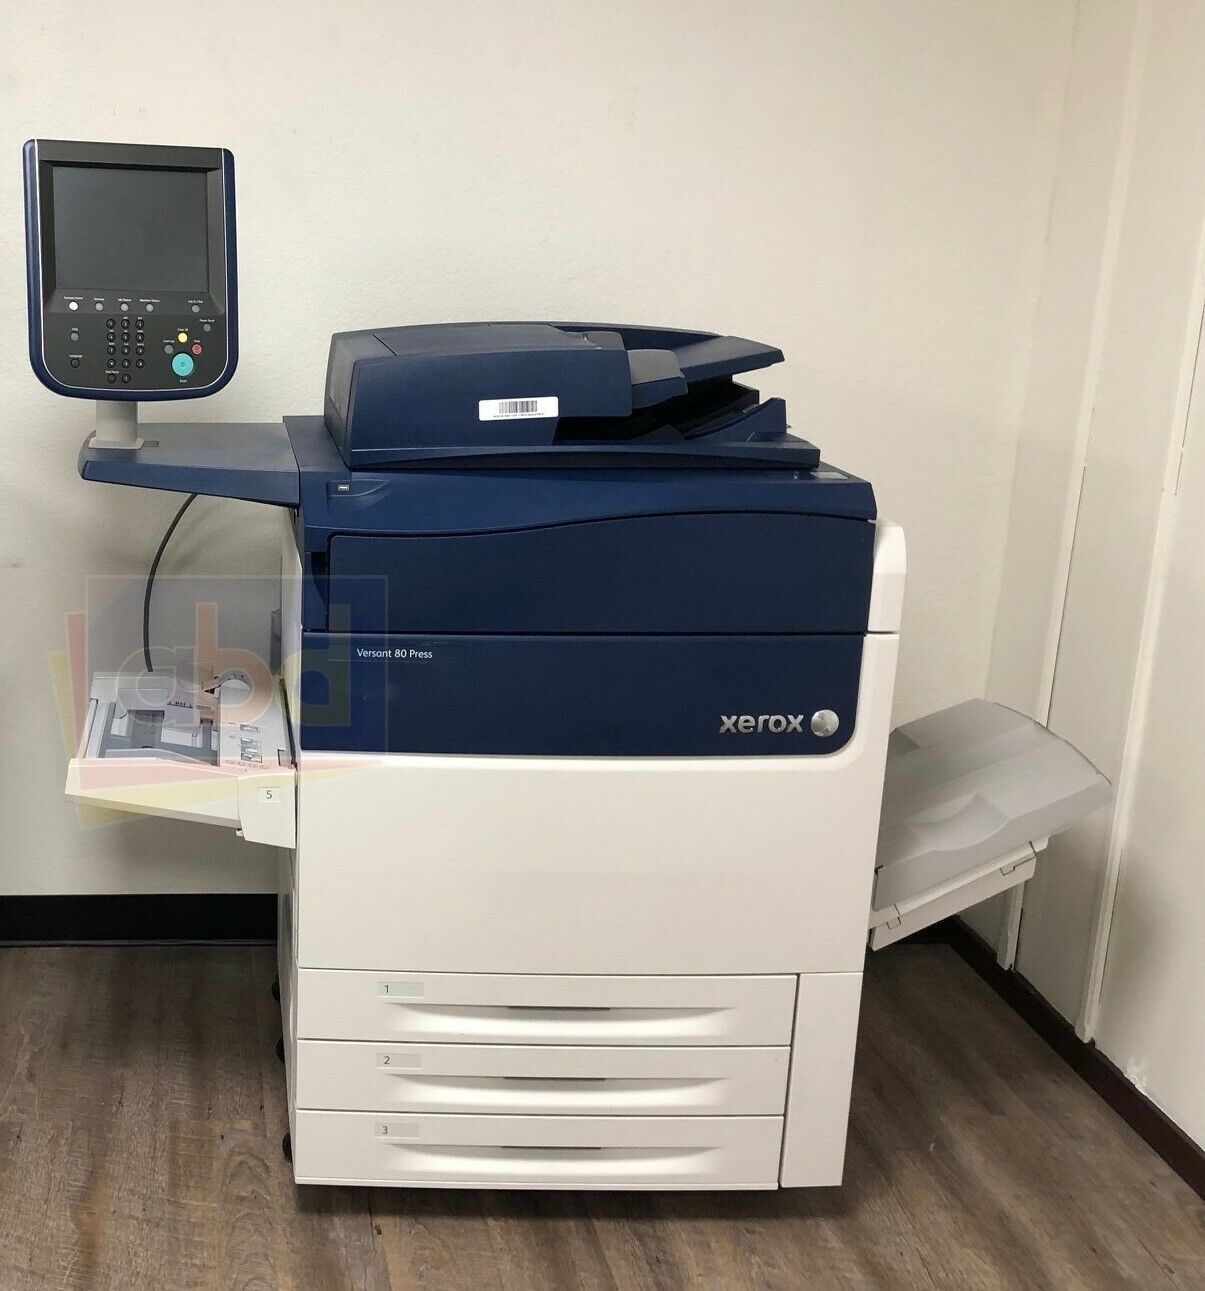 Xerox Versant 80 Press with Bypass Tray Offset Catch Tray Integrated Fiery 80ppm